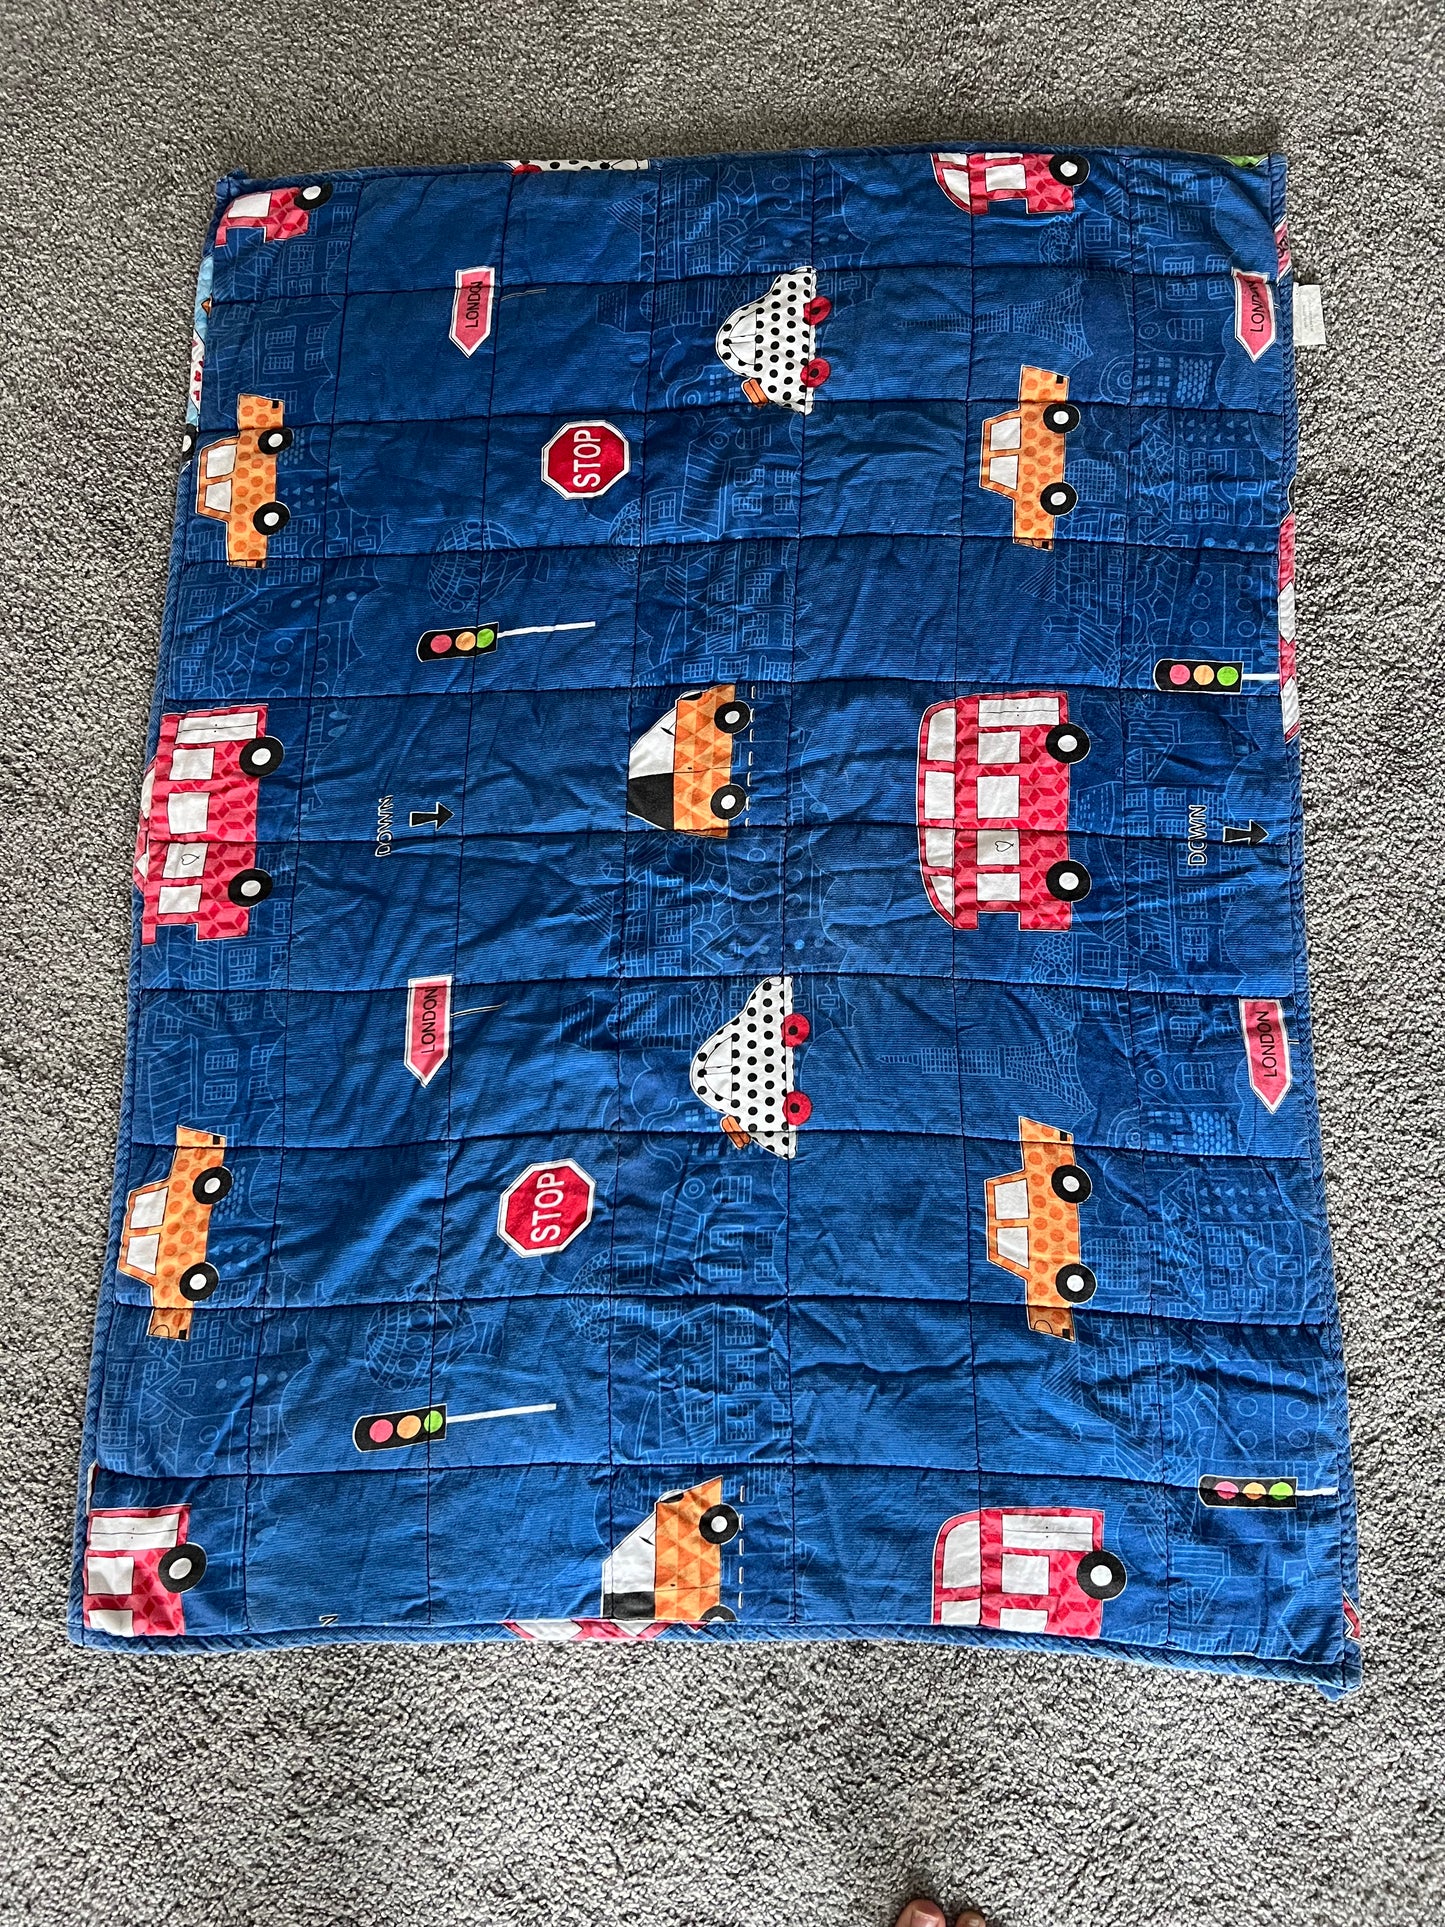 Weighted Blanket - Crib Size - Transportation Theme